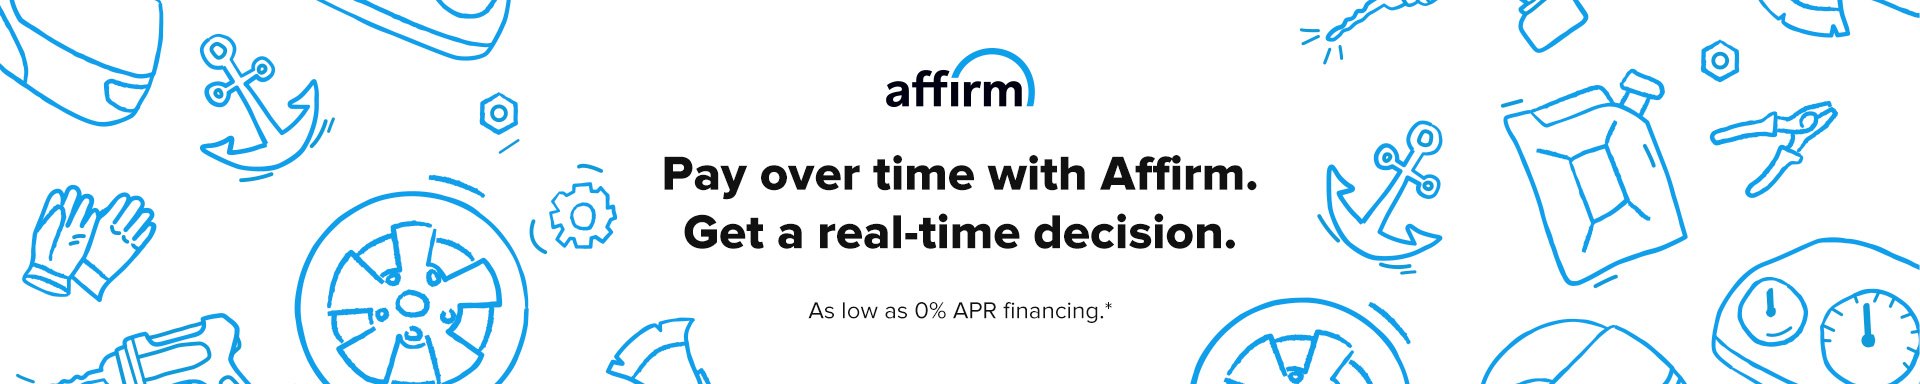 Affirm | Easy Financing | Pay Later with Affirm - MOTORCYCLEiD.com